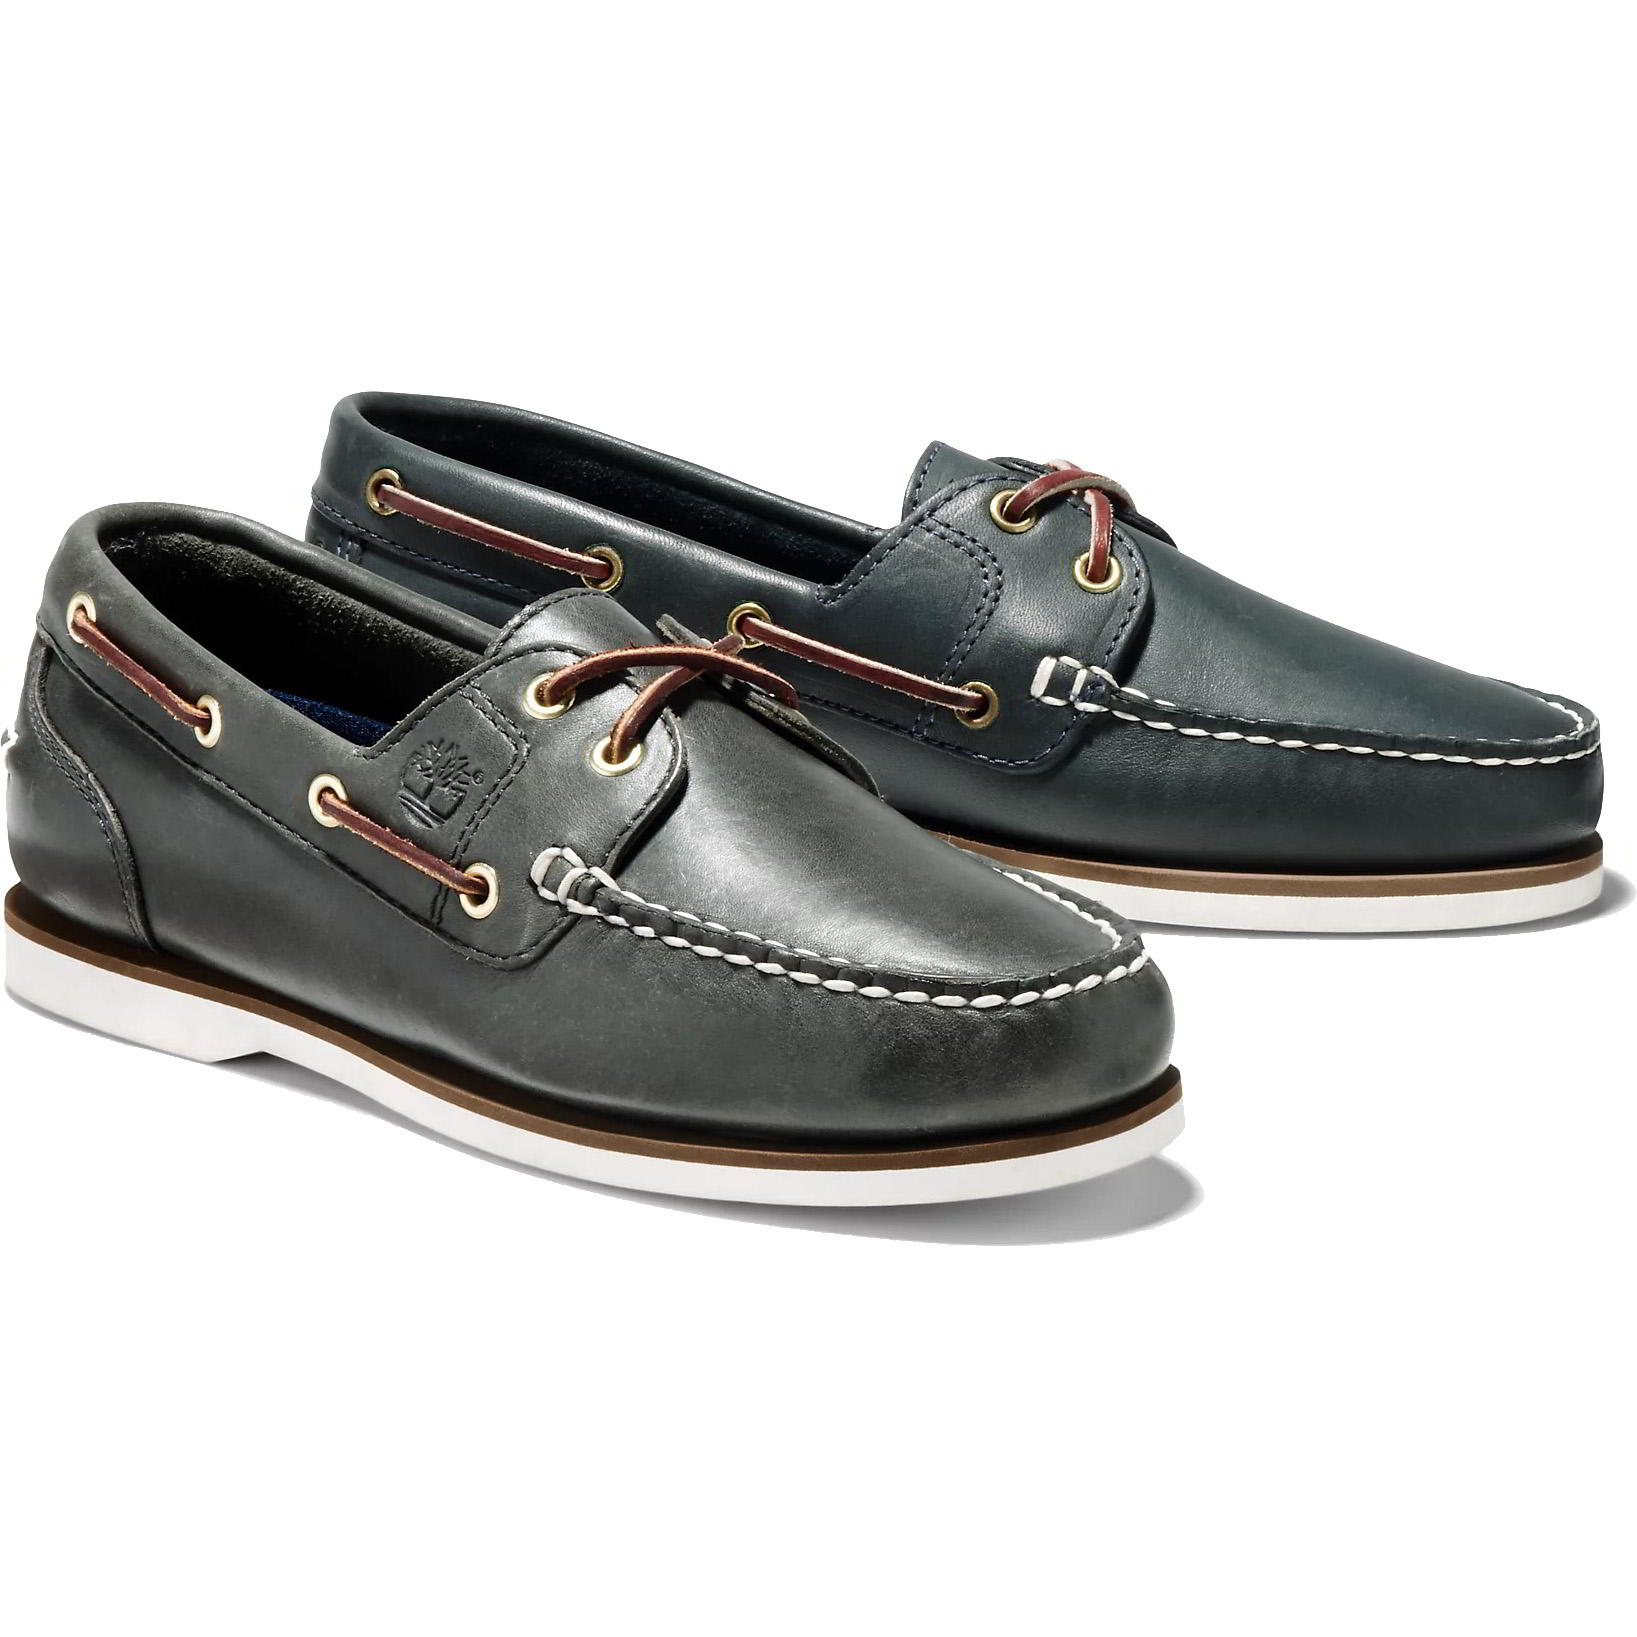 timberland boat shoes men,OFF 71%,www.concordehotels.com.tr